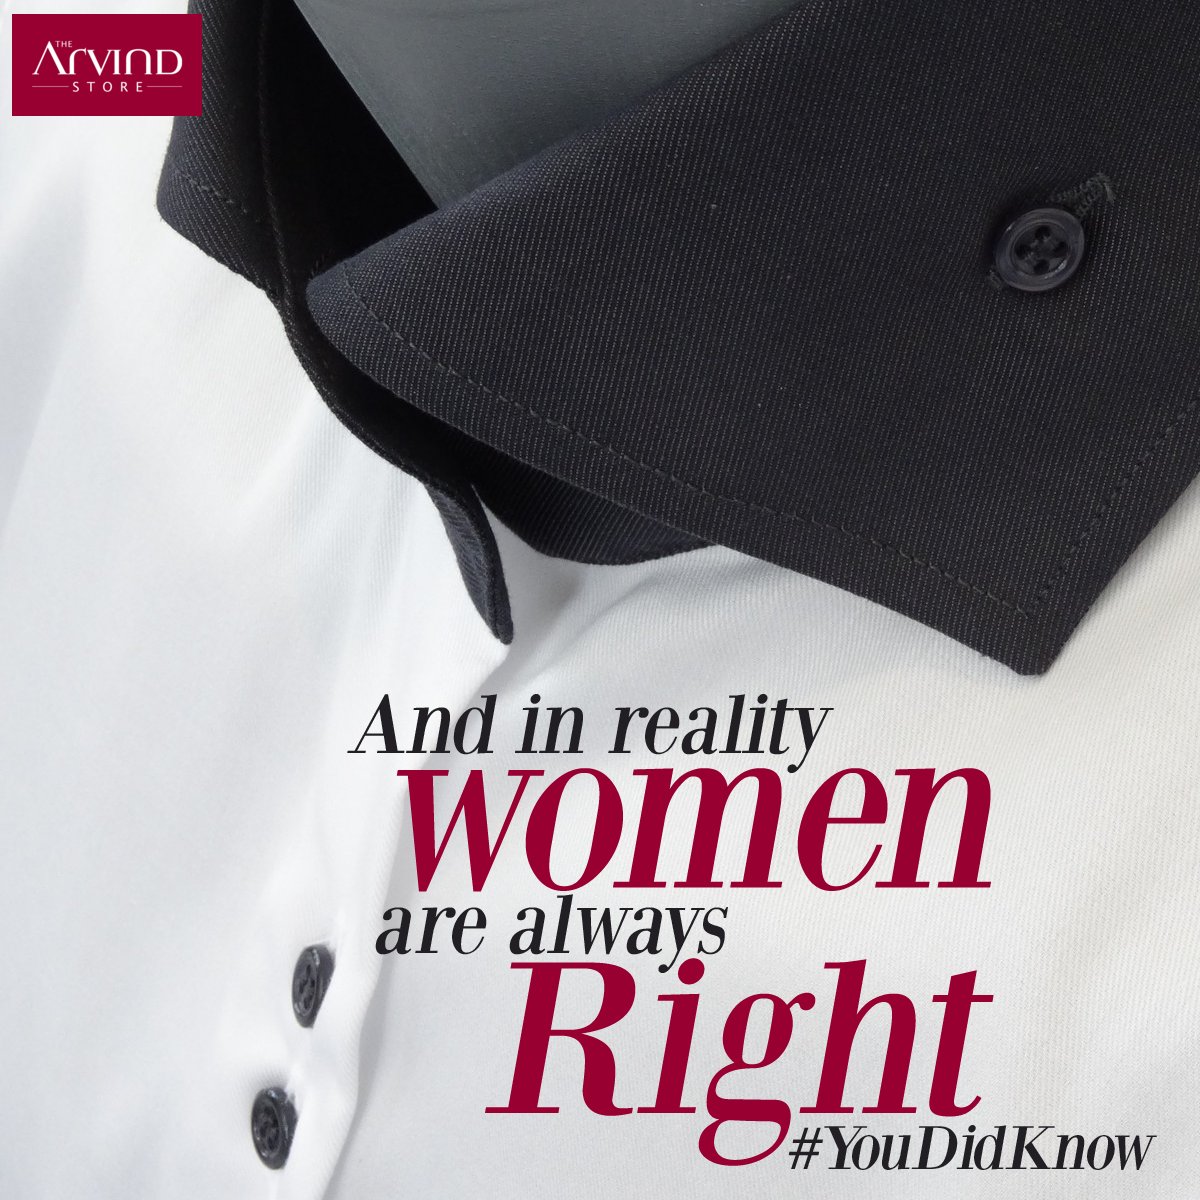 #DidYouKnow Shirt buttons are on the right for men, and left for women. https://t.co/A3sShxnu9c